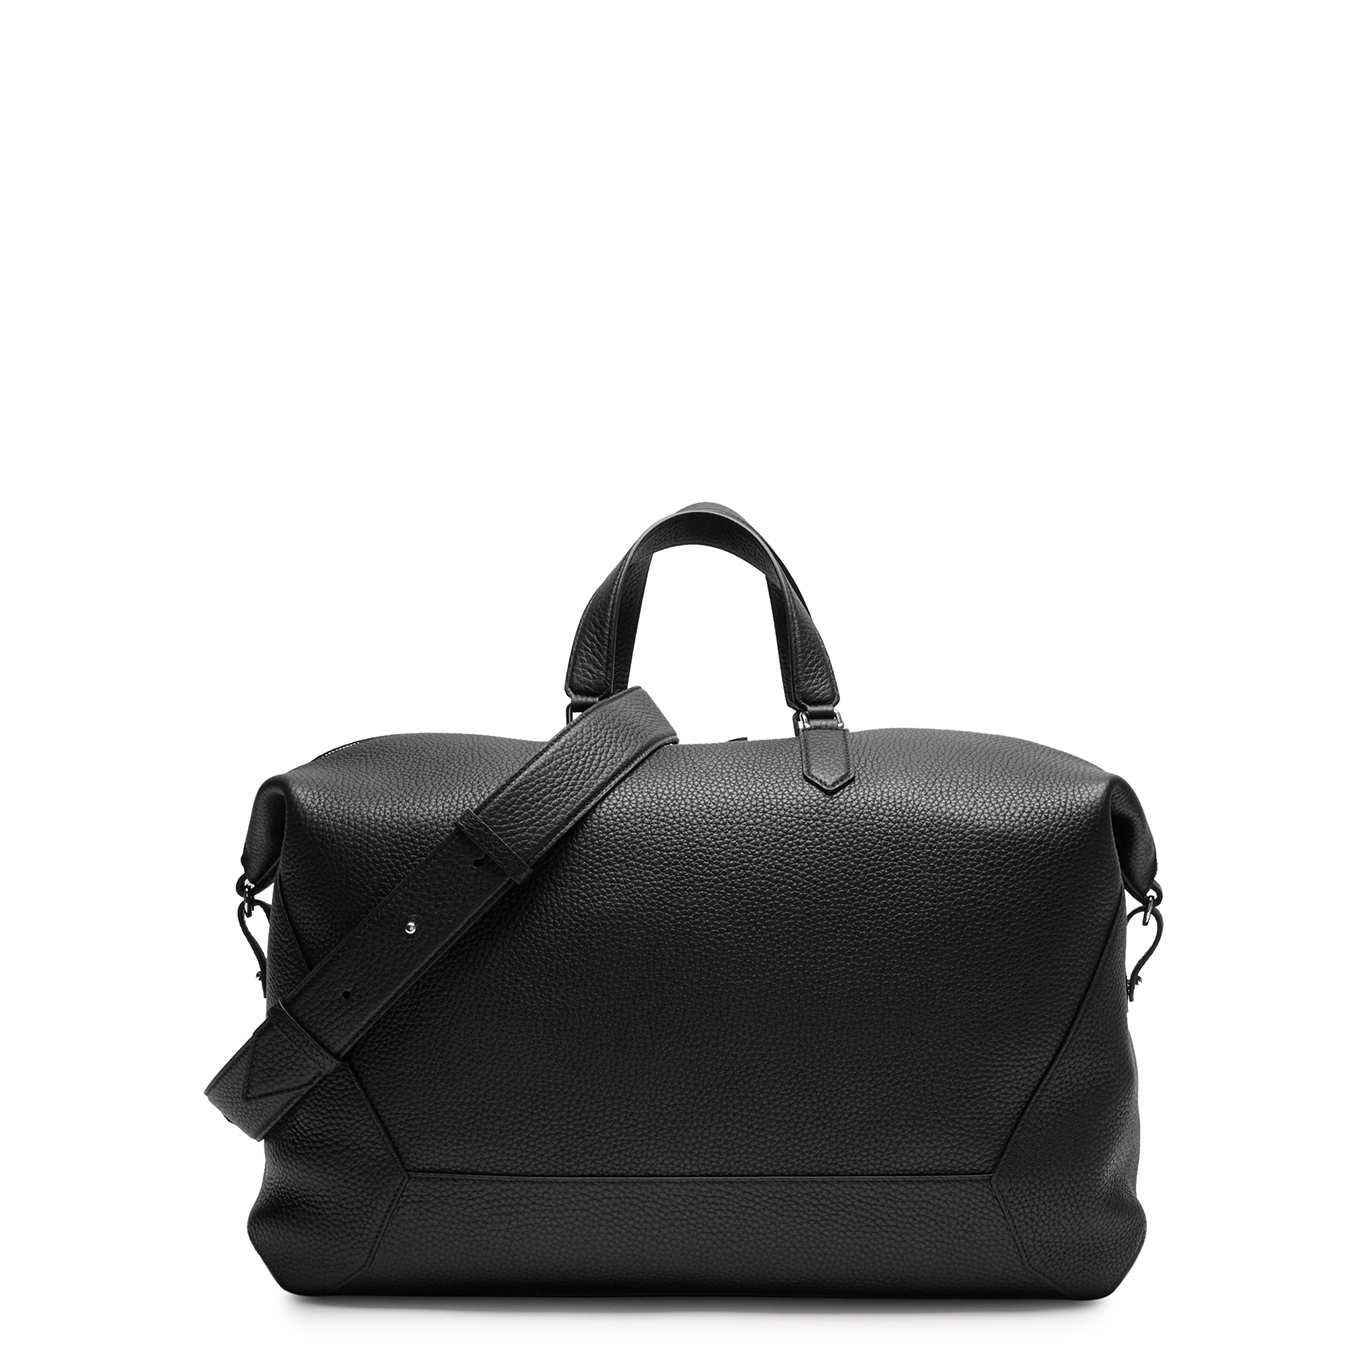 ALEXANDER MCQUEEN EDGE GRAINED LEATHER HOLDALL